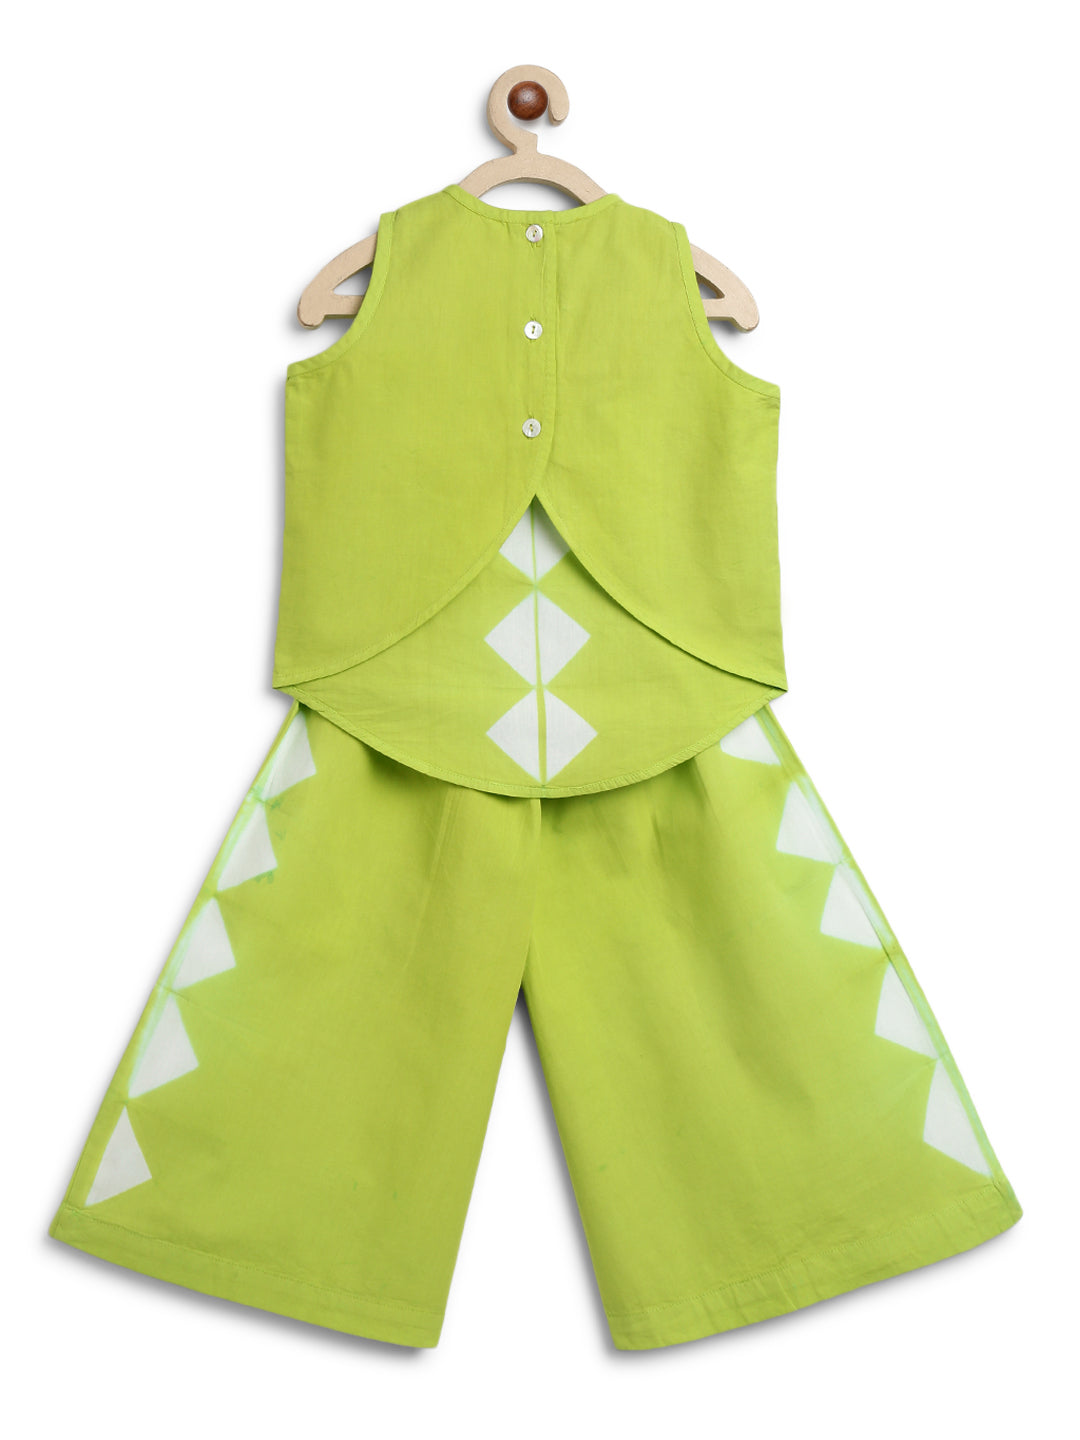 Twisty Triangle Girl Coord Set - Green